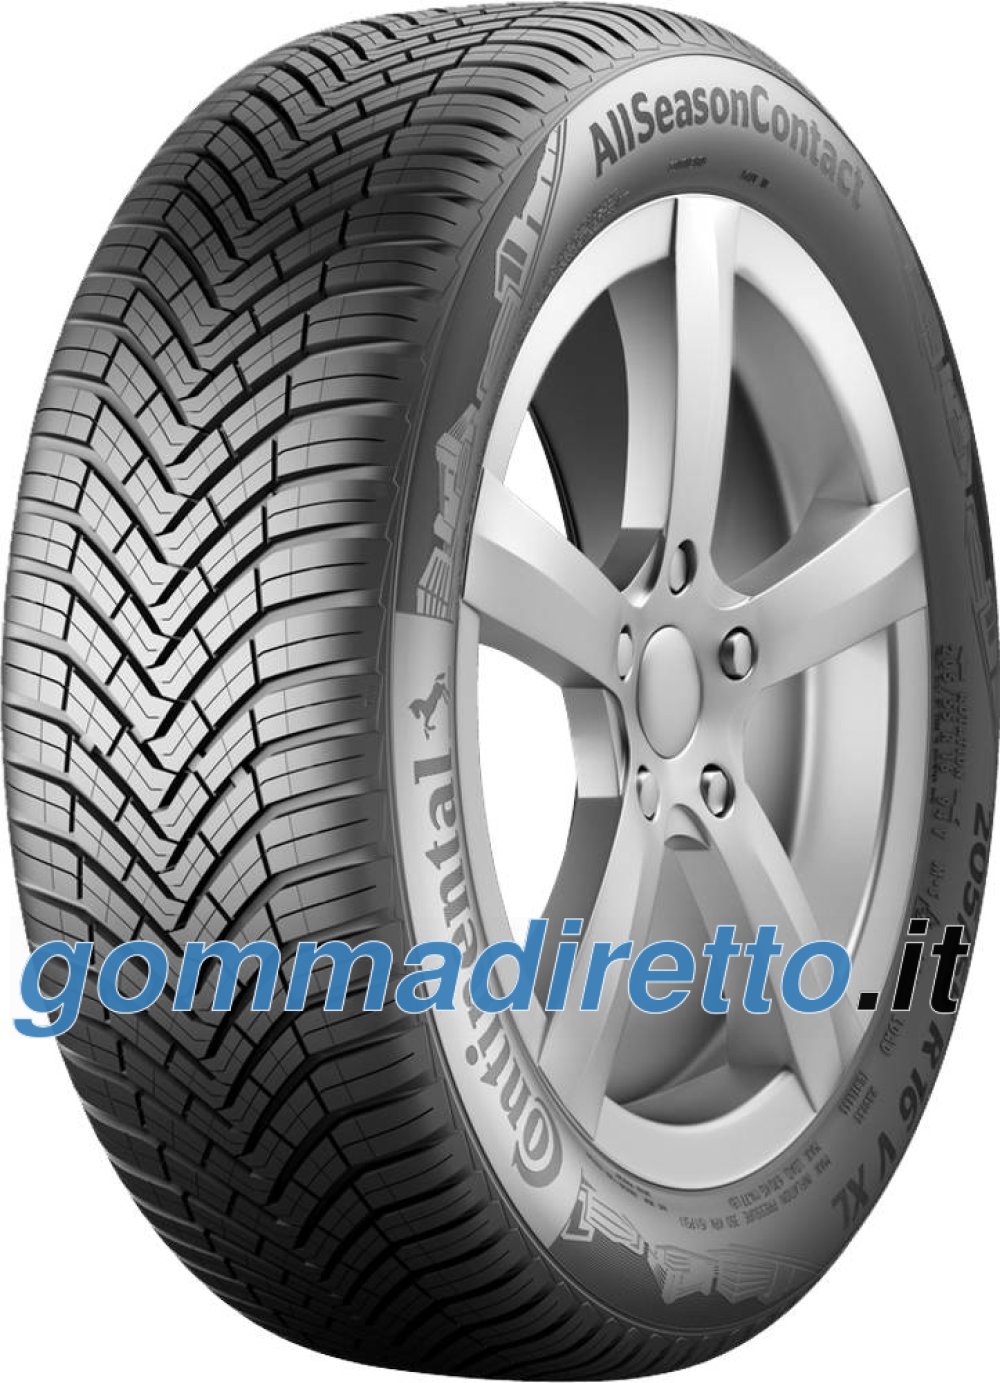 Image of        Continental AllSeasonContact ( 185/65 R15 92H XL EVc )